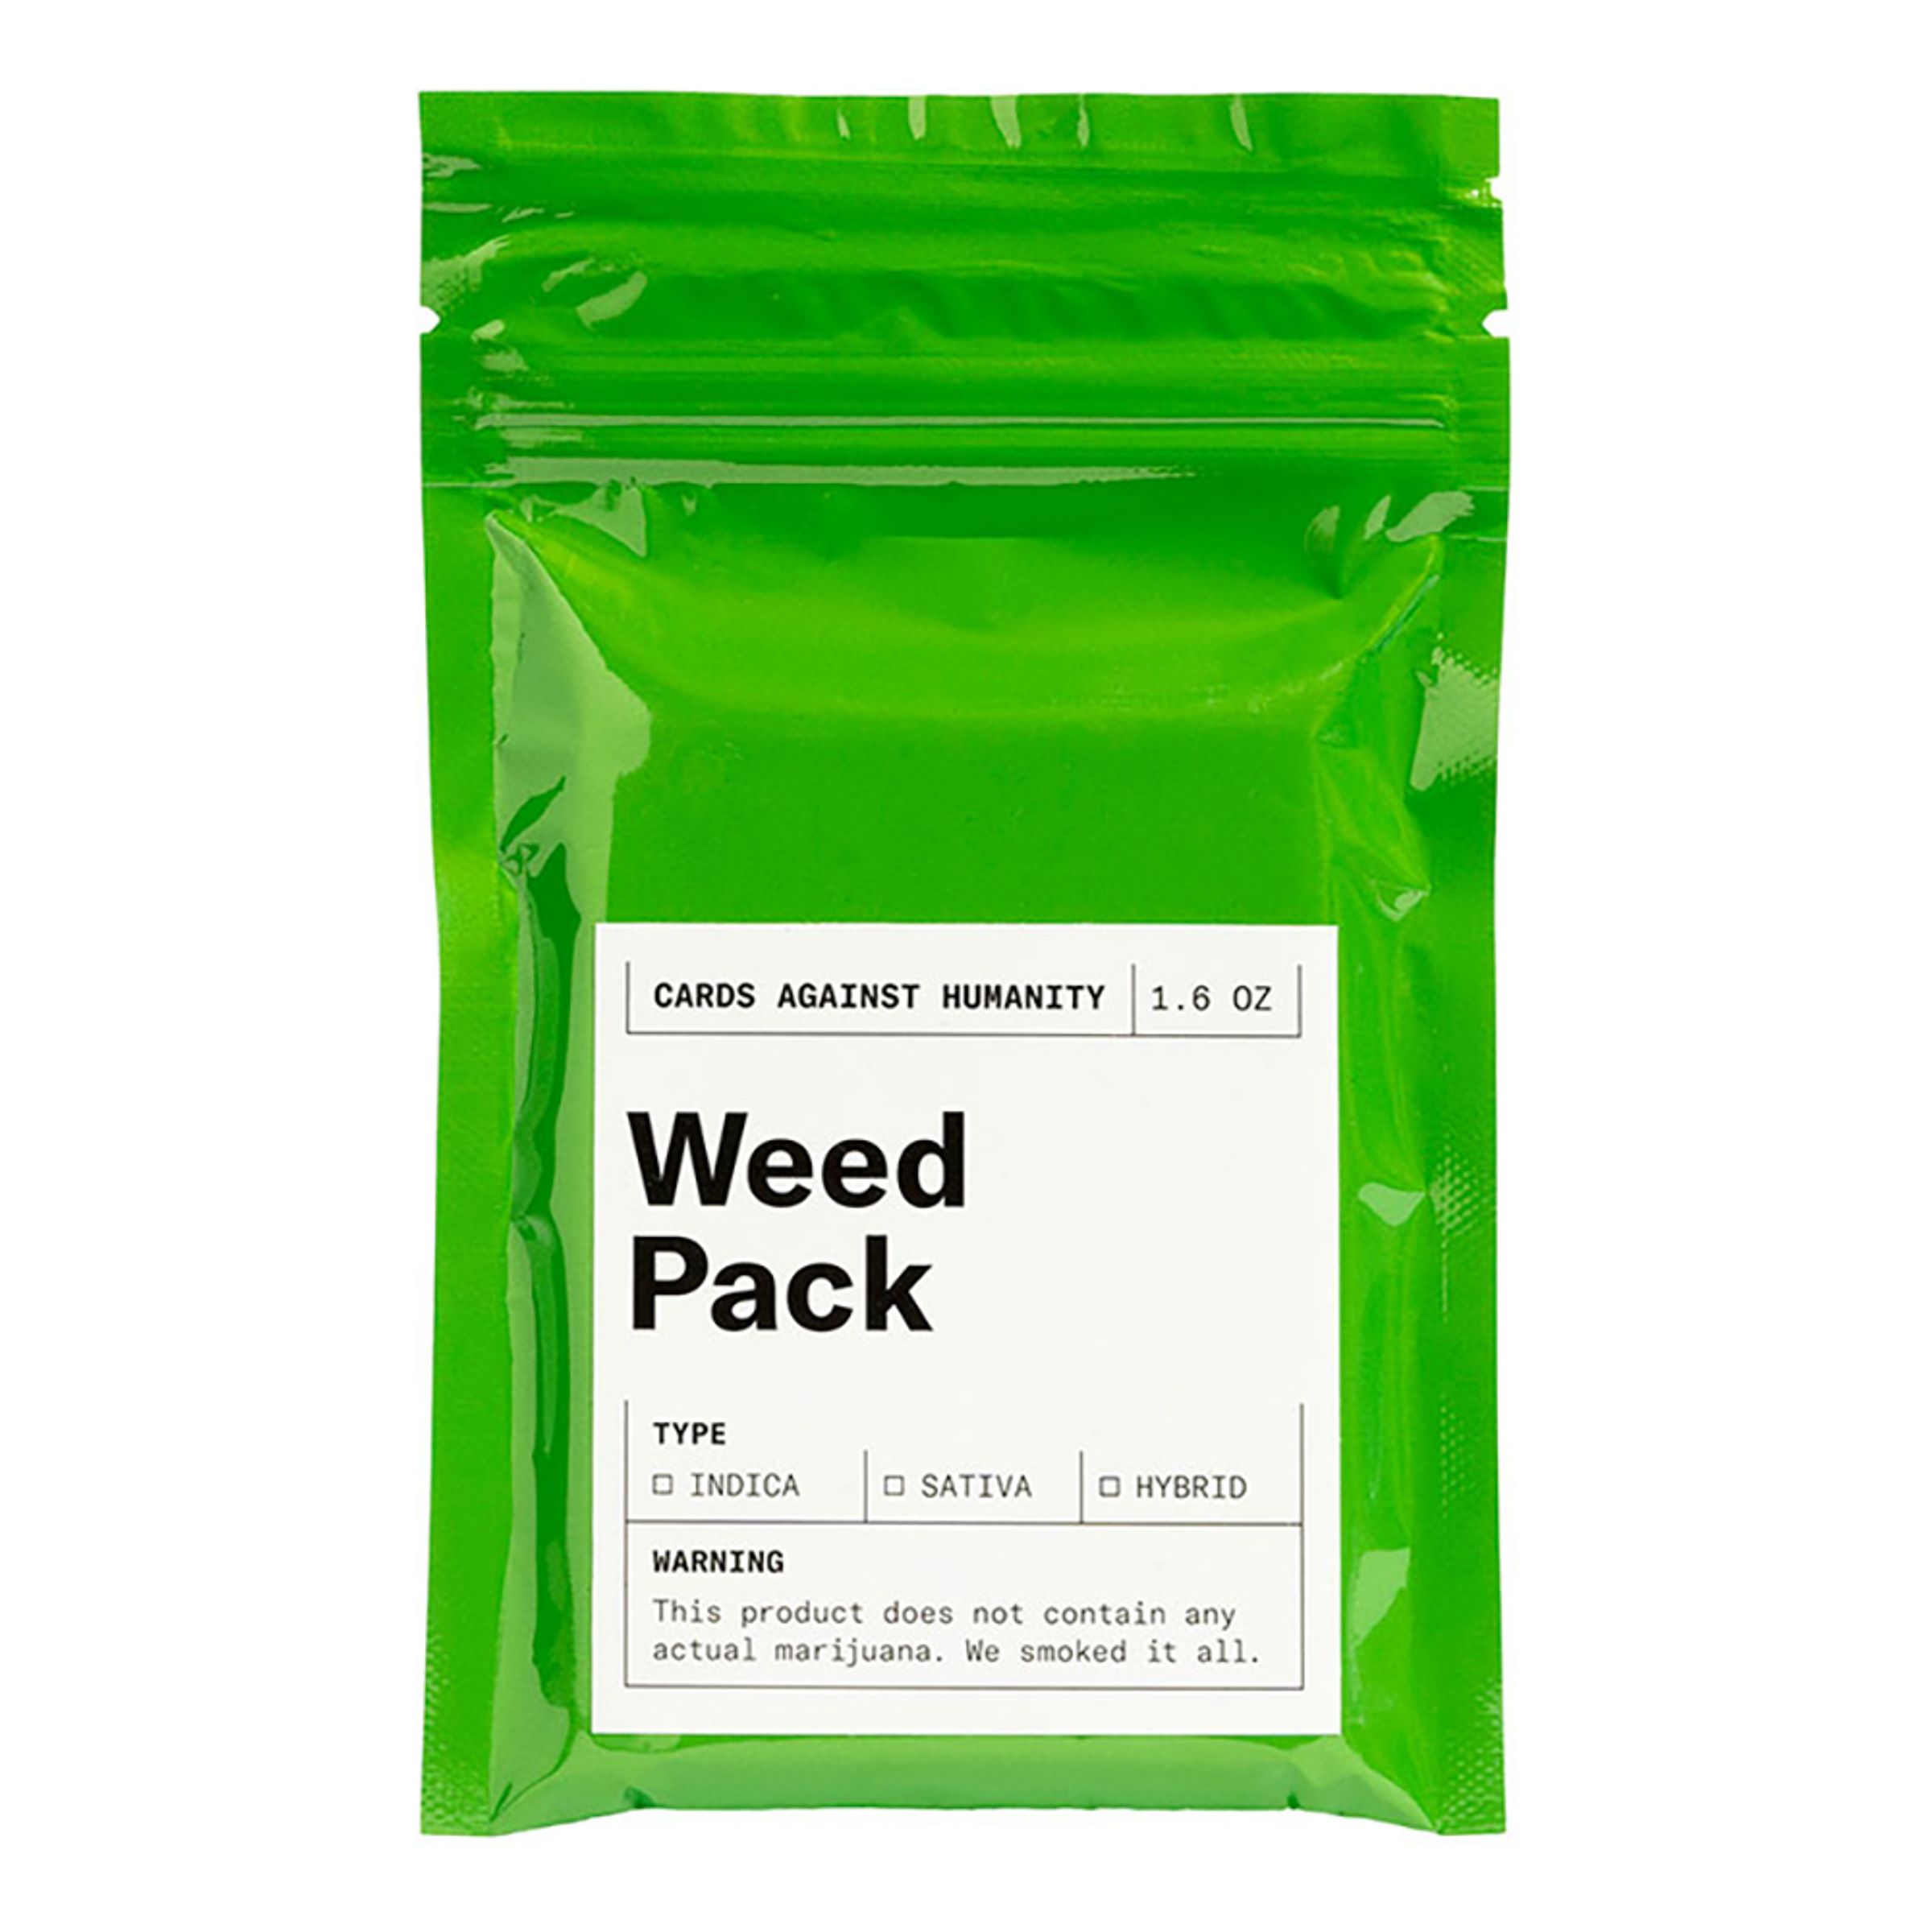 Läs mer om Cards Against Humanity - Weed Pack Expansion